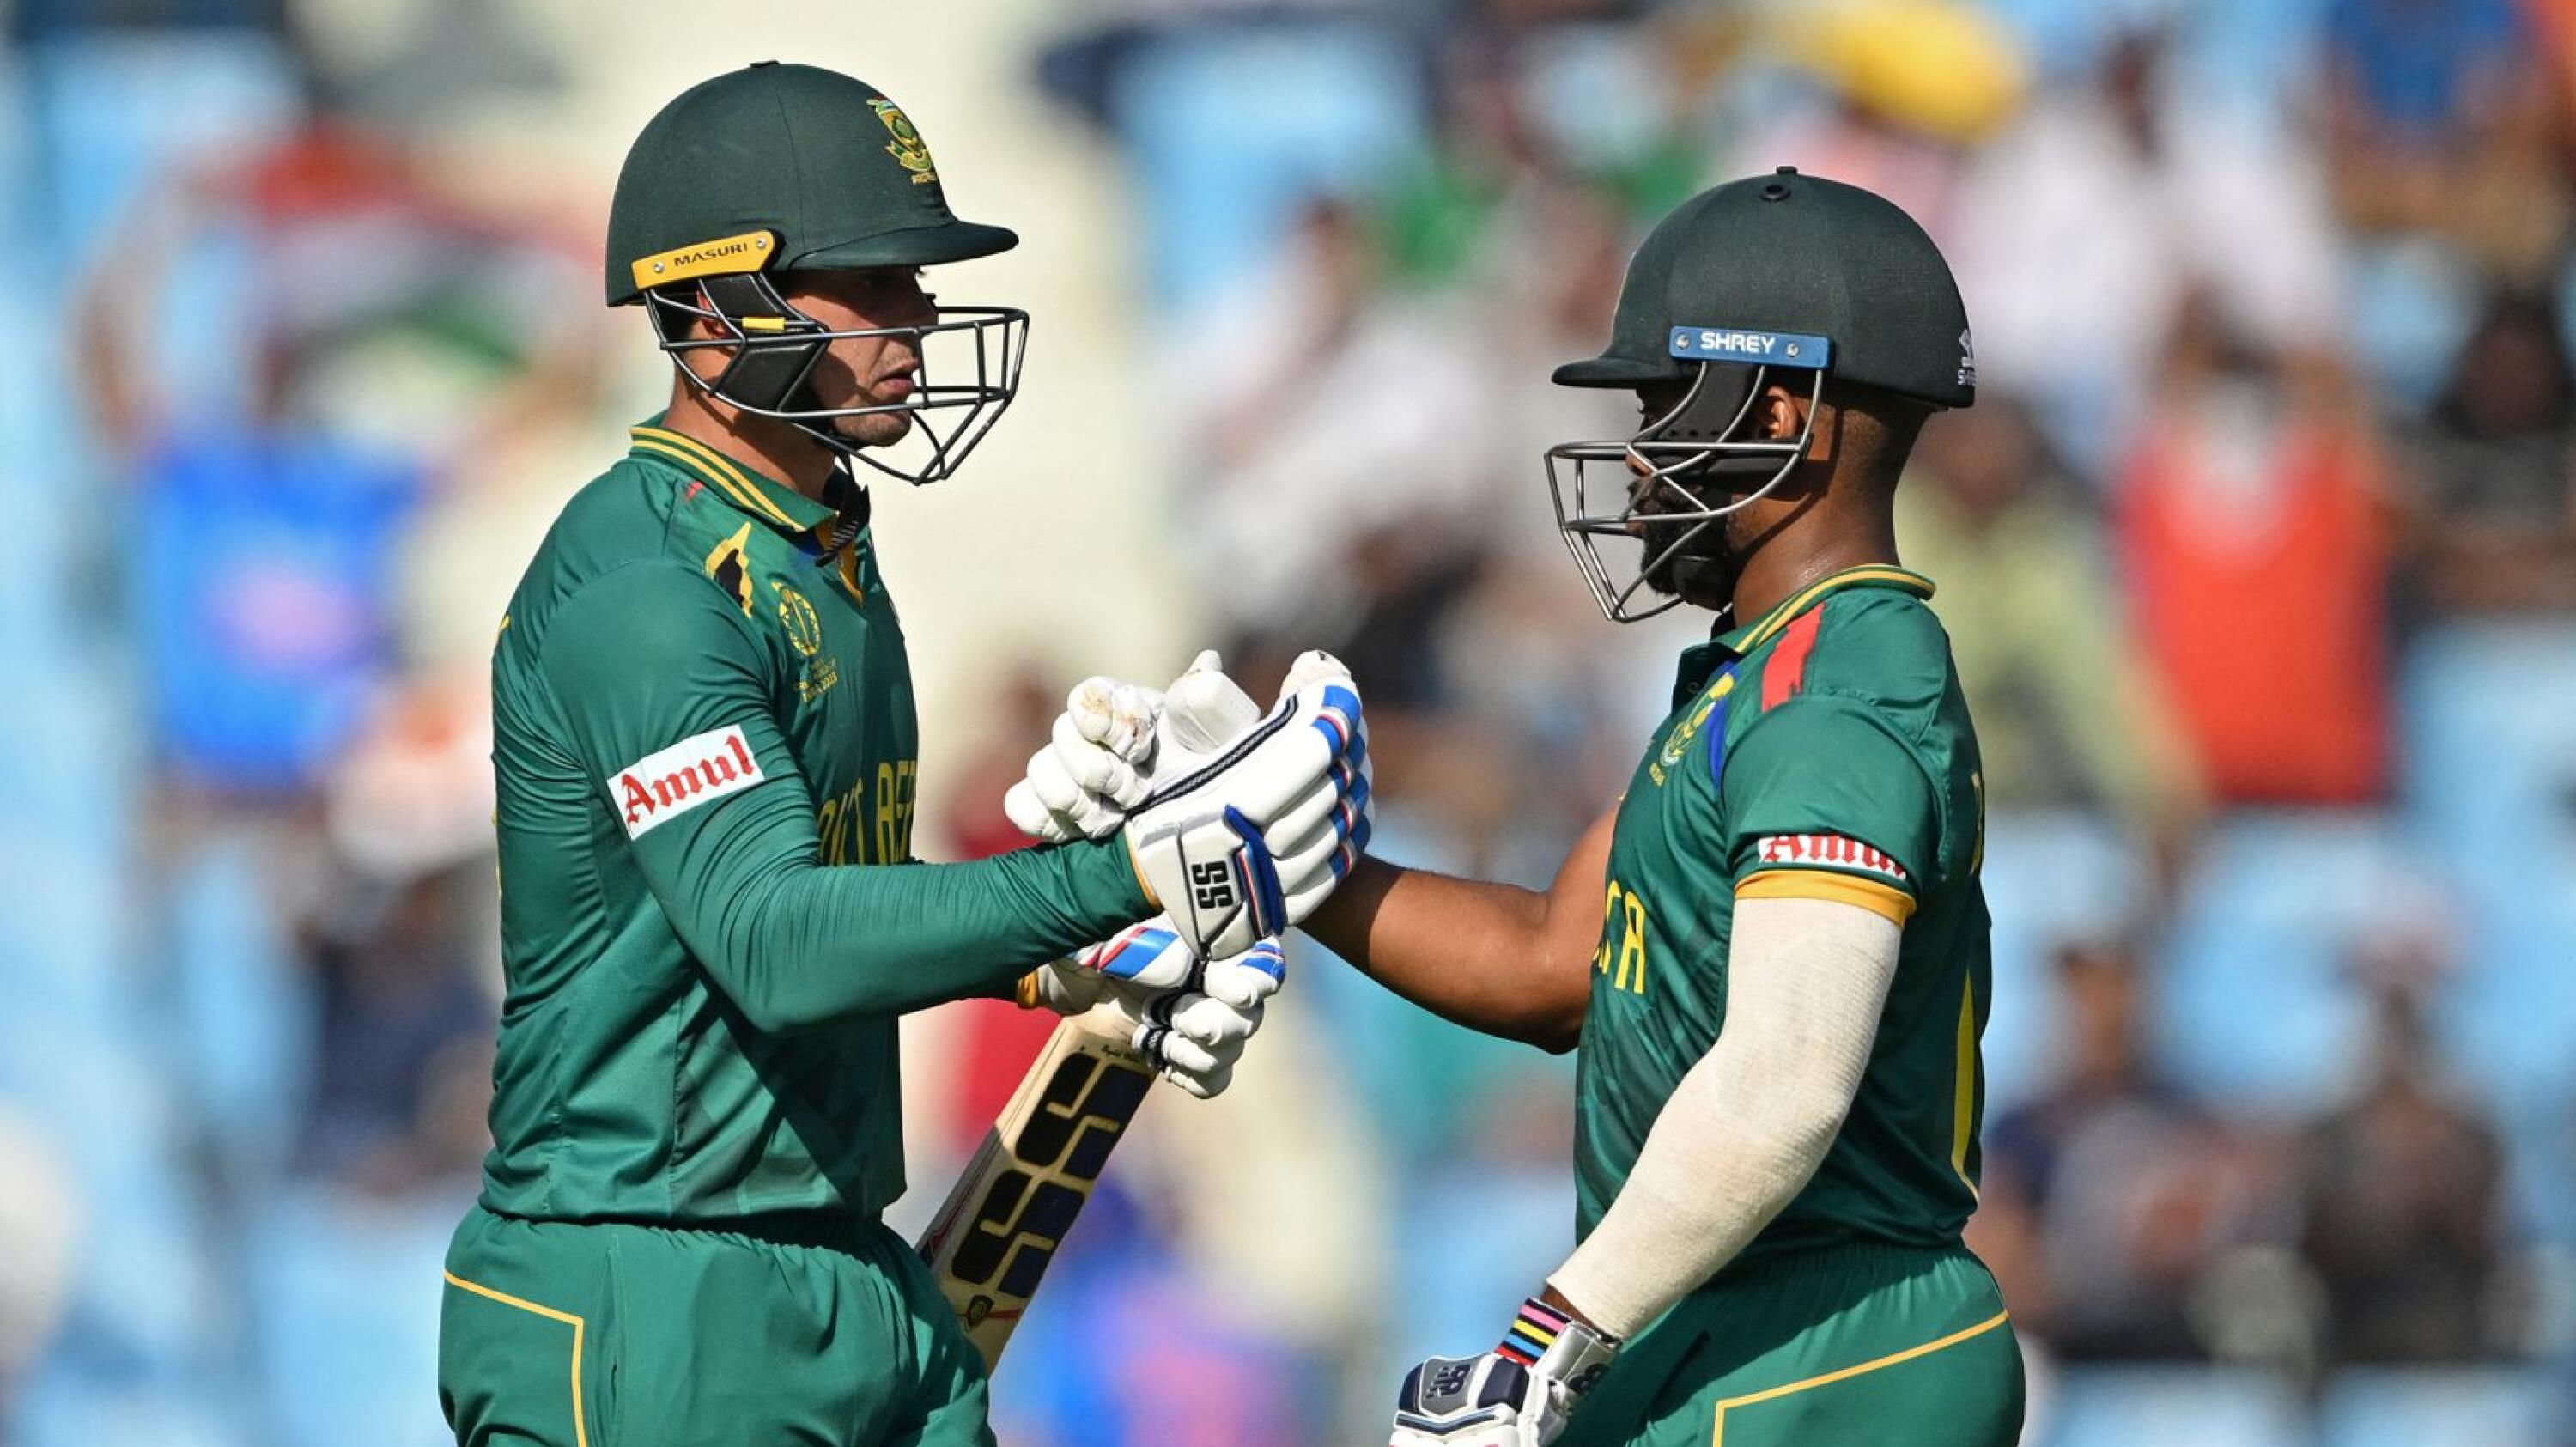 South Africa's Quinton de Kock celebrates with Temba Bavuma after scoring a half-century during their Cricket World Cup match against Australia